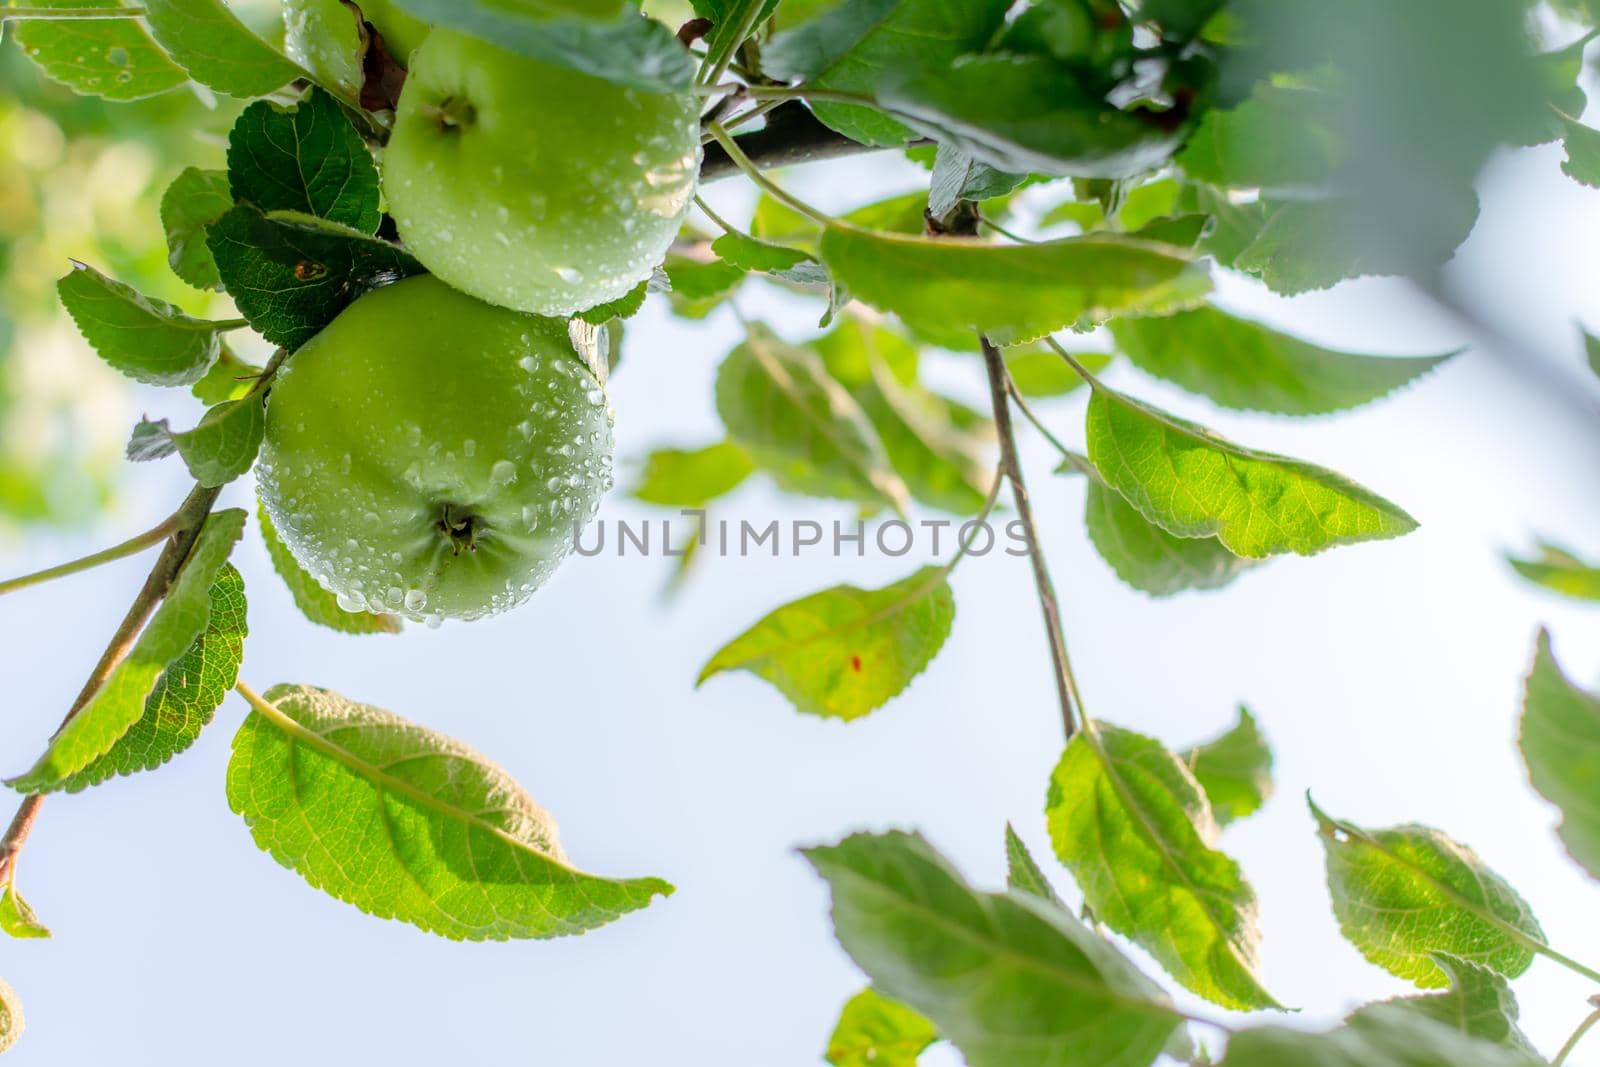 Juicy green apples are covered with raindrops in the morning garden on a branch of foliage